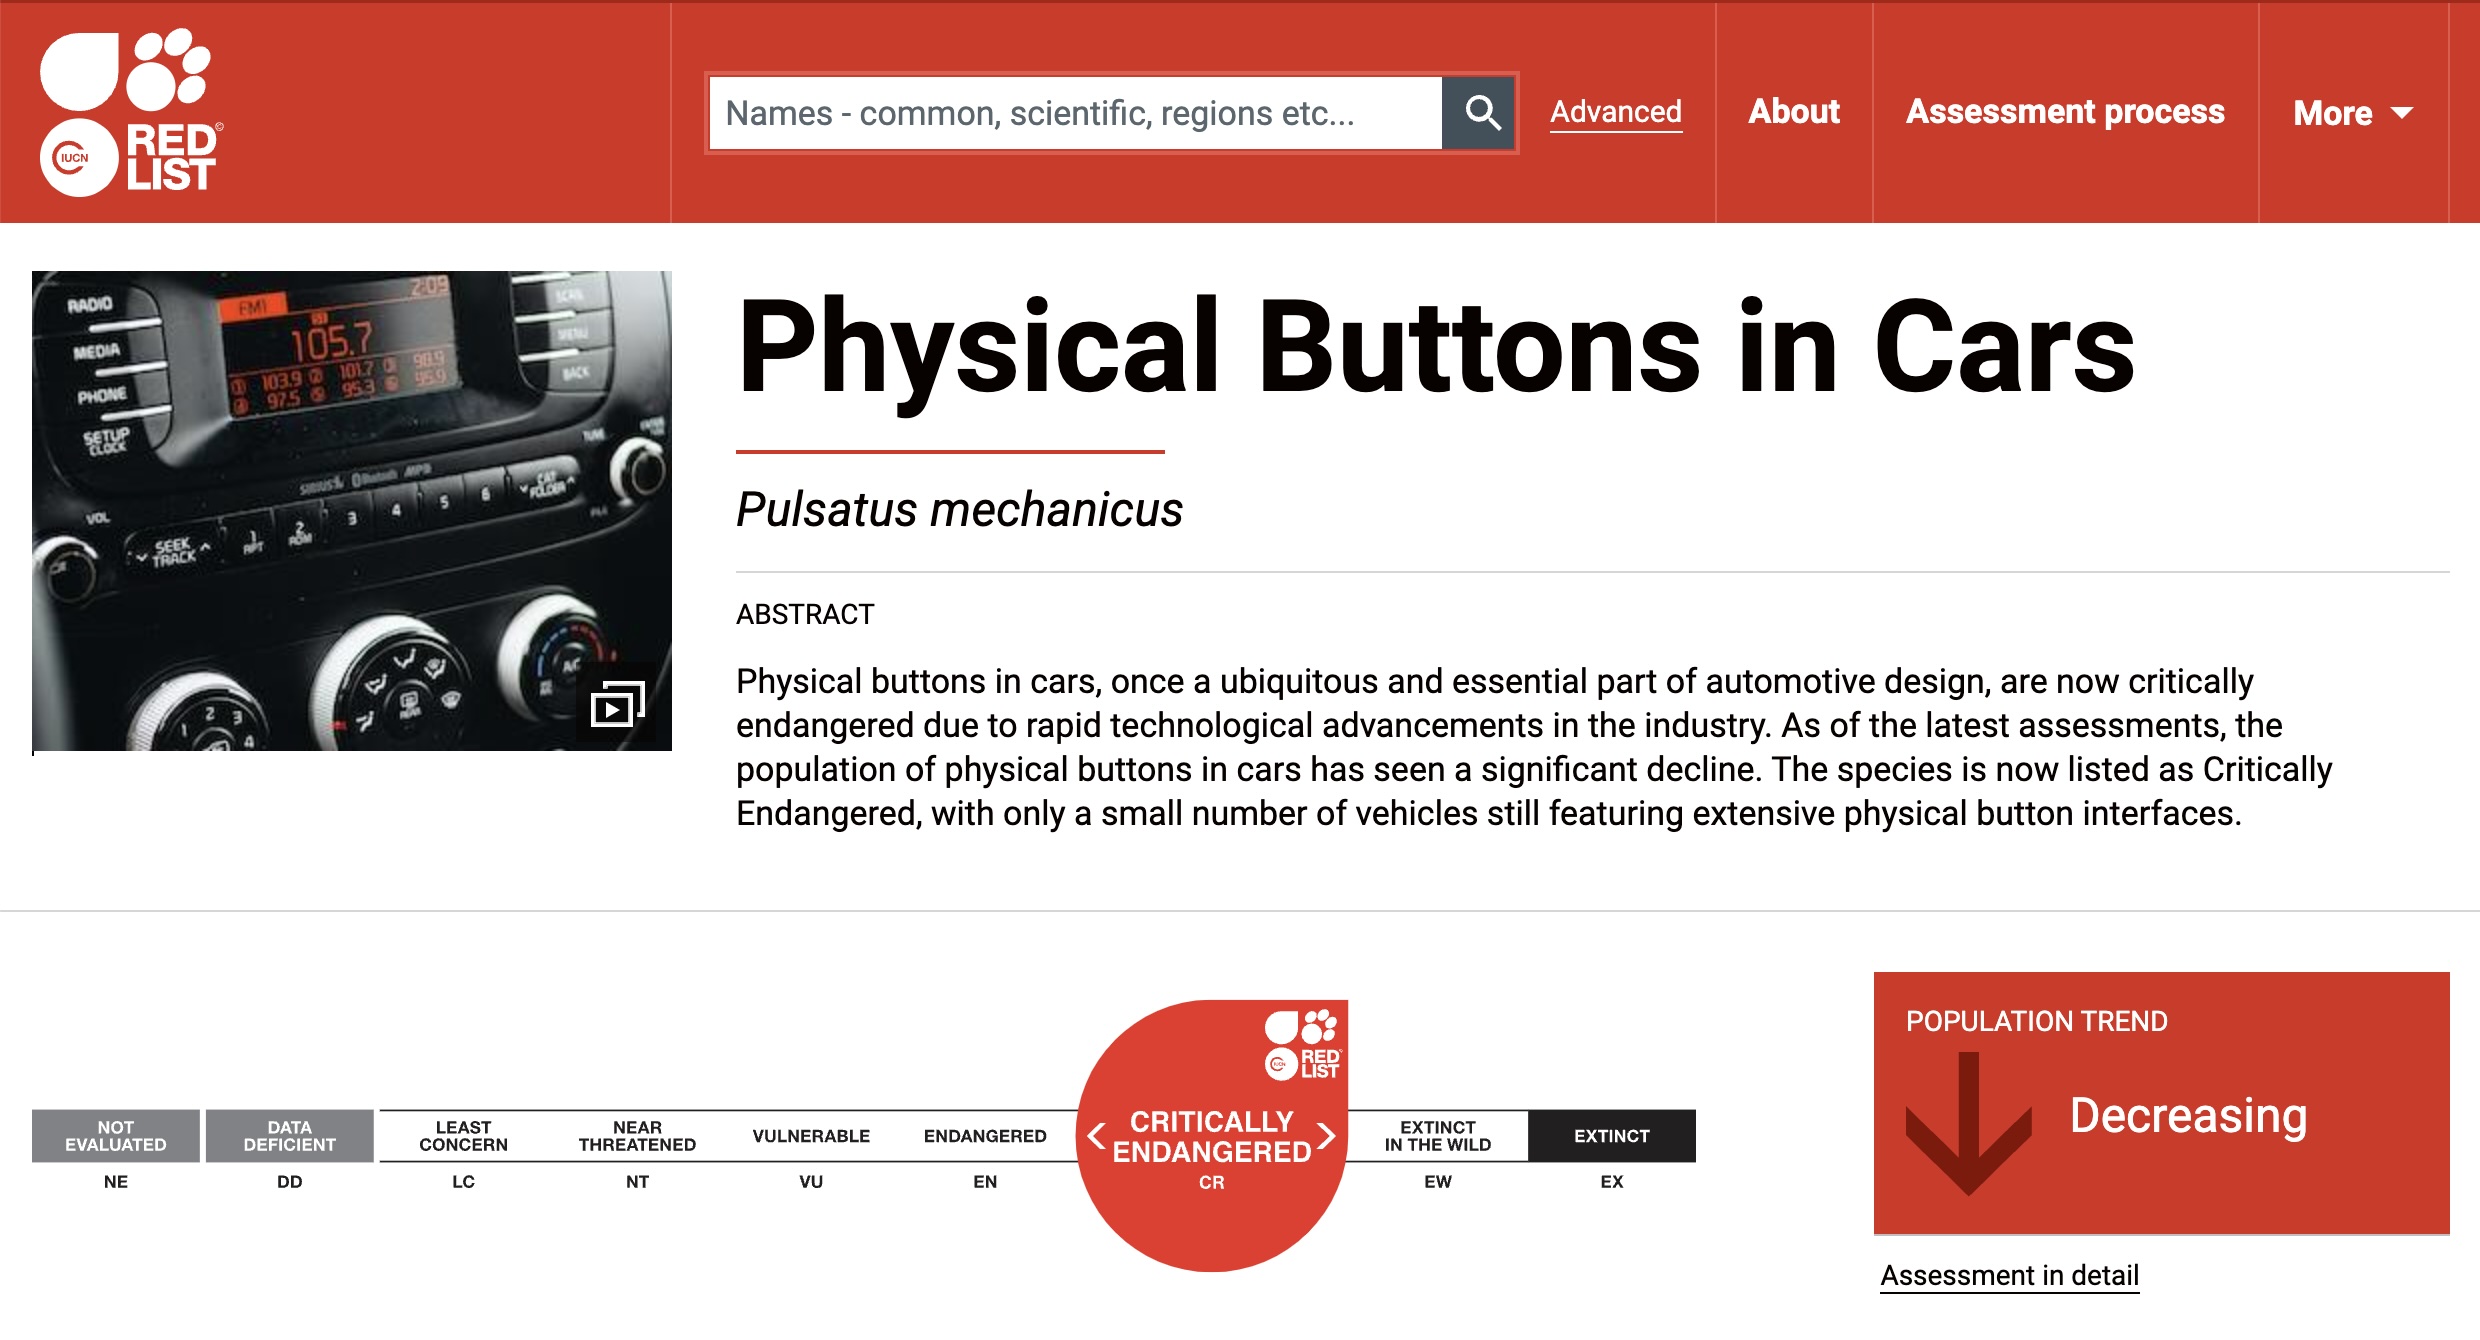 Physical buttons in cars, once a ubiquitous and essential part of automotive design, are now critically endangered due to rapid technological advancements in the industry. As of the latest assessments, the population of physical buttons in cars has seen a significant decline. The species is now listed as Critically Endangered, with only a small number of vehicles still featuring extensive physical button interfaces.